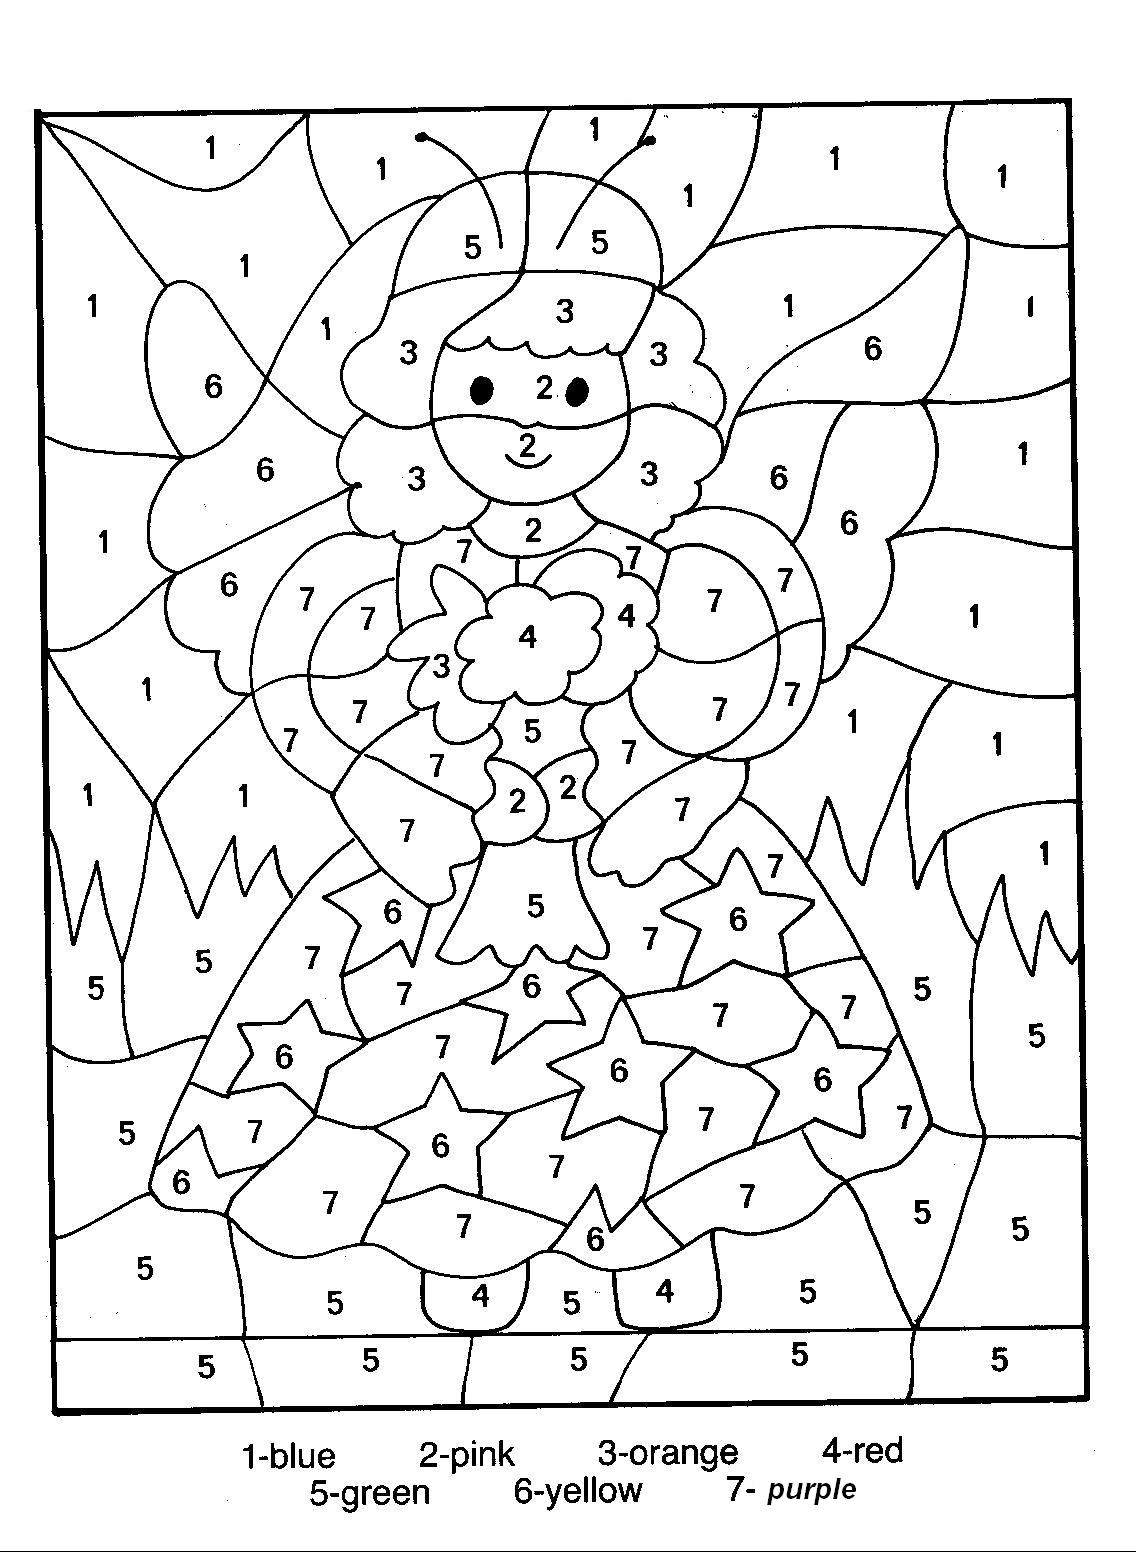 Drawing Coloring By Numbers 125506 Educational Printable Coloring 